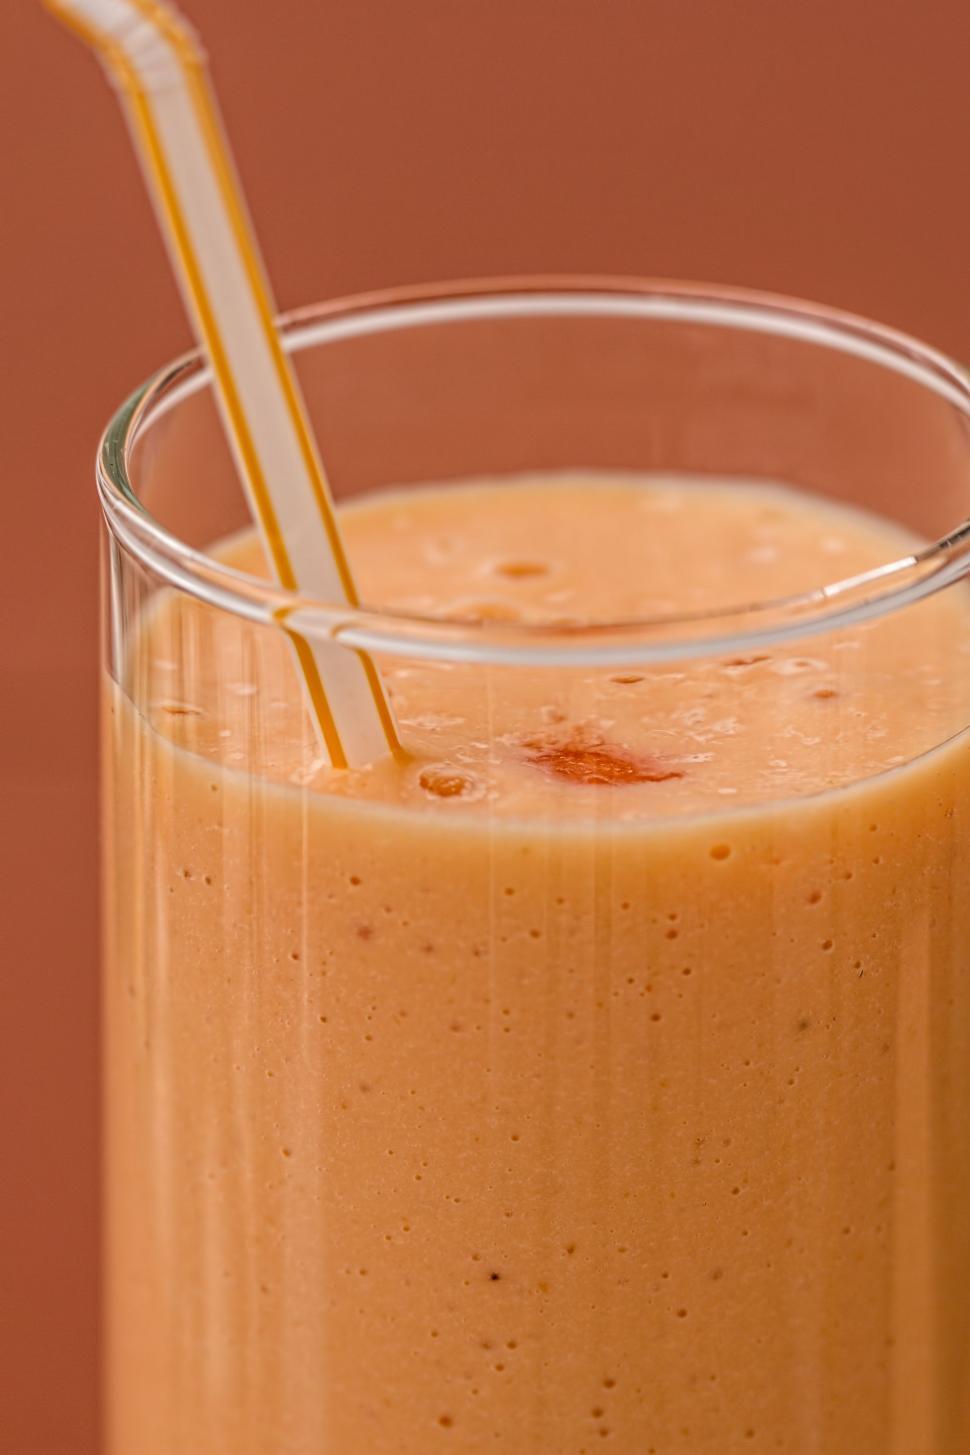 Free Image of Refreshing Smoothie in Glass With Straw 